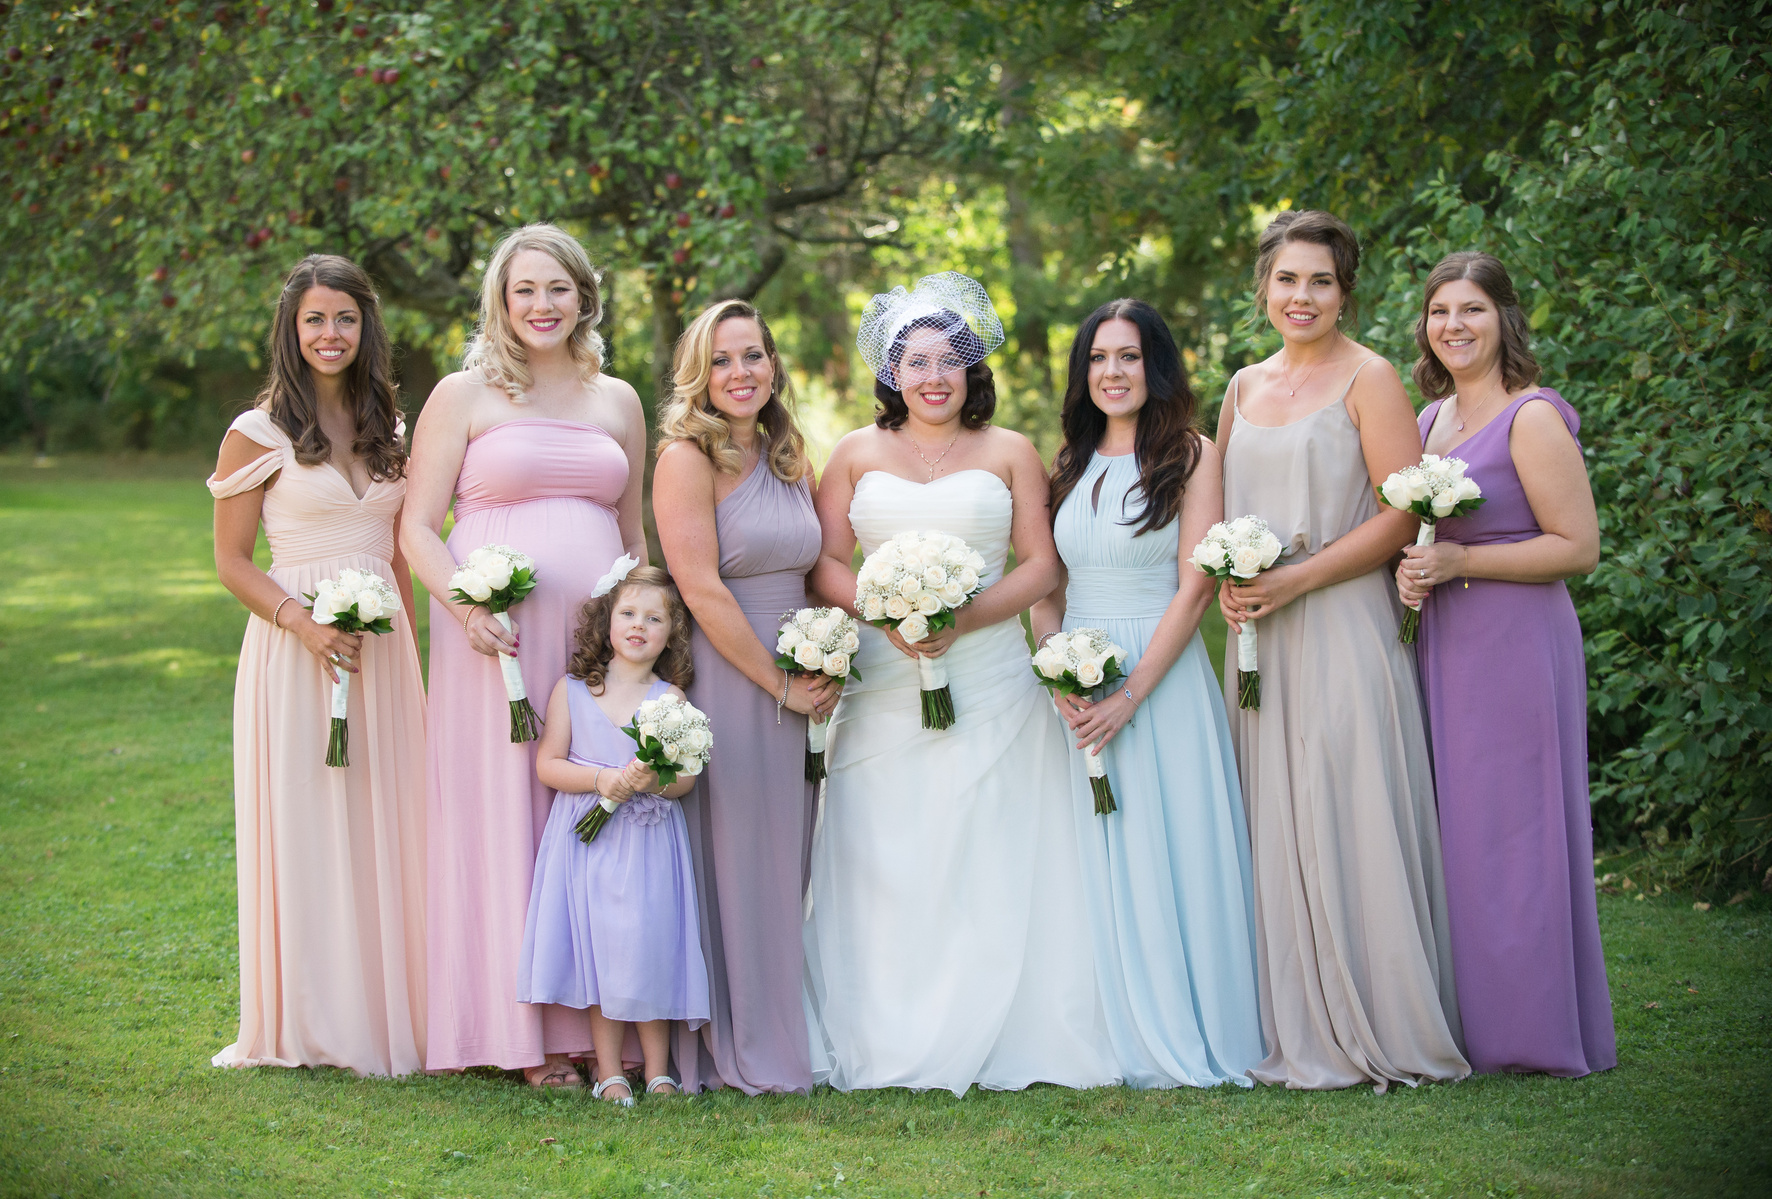 Spring wedding - bridal party in coordinating pastels. Rochester NY